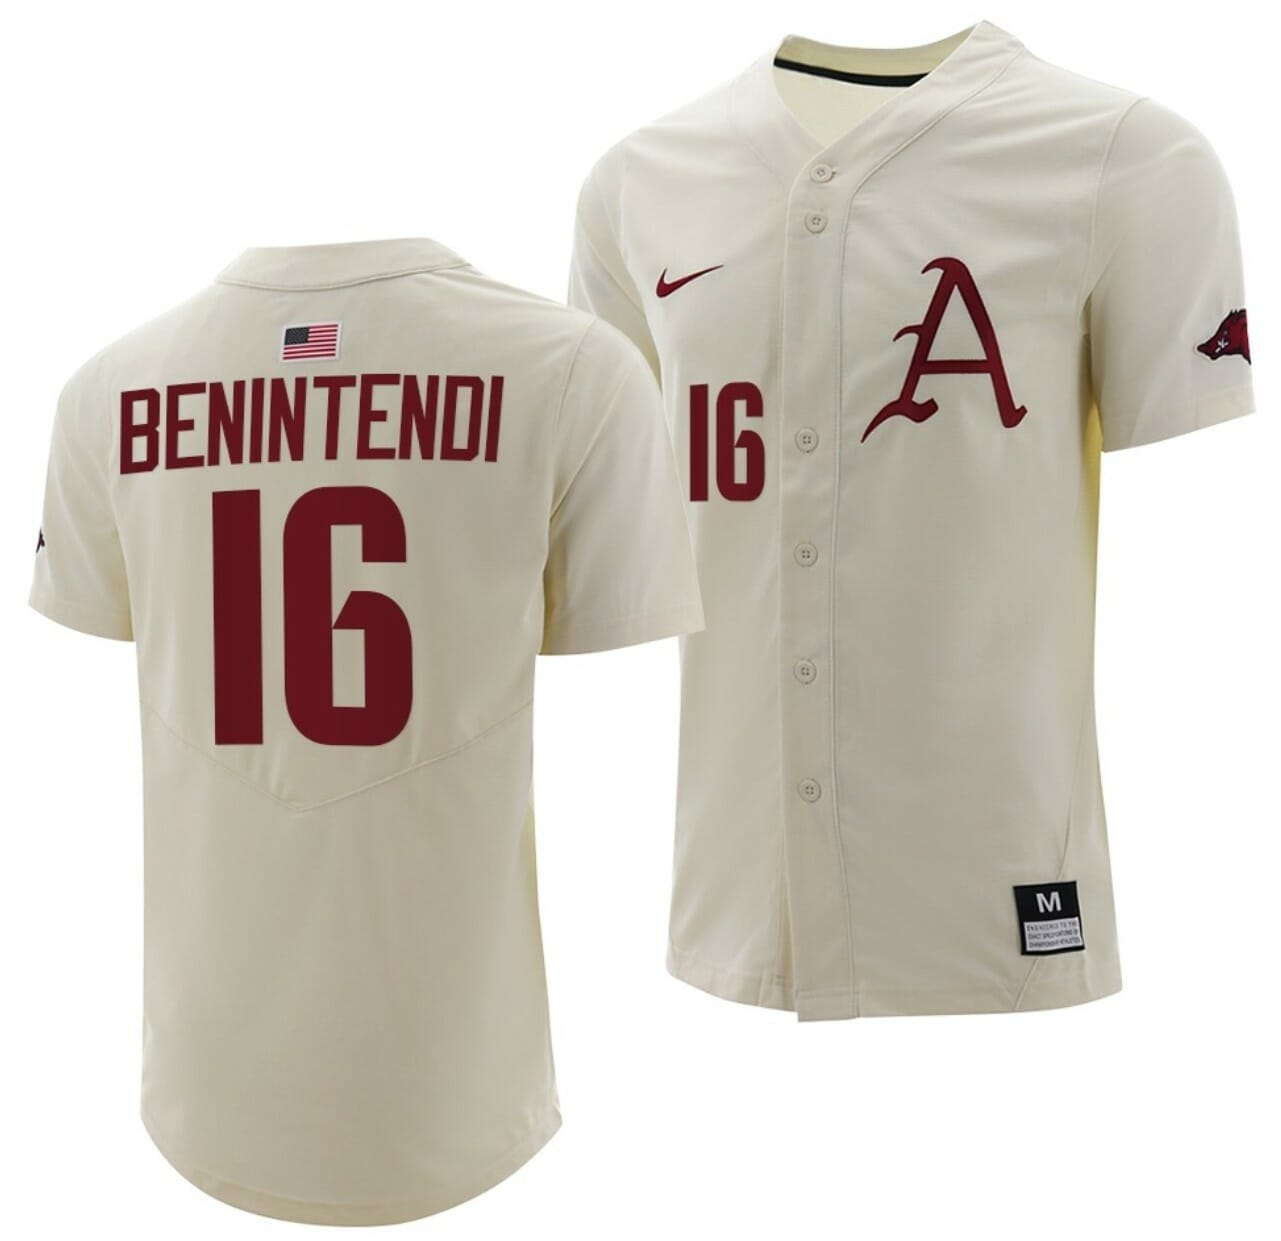 Available] Buy New Andrew Benintendi Jersey Natural #16